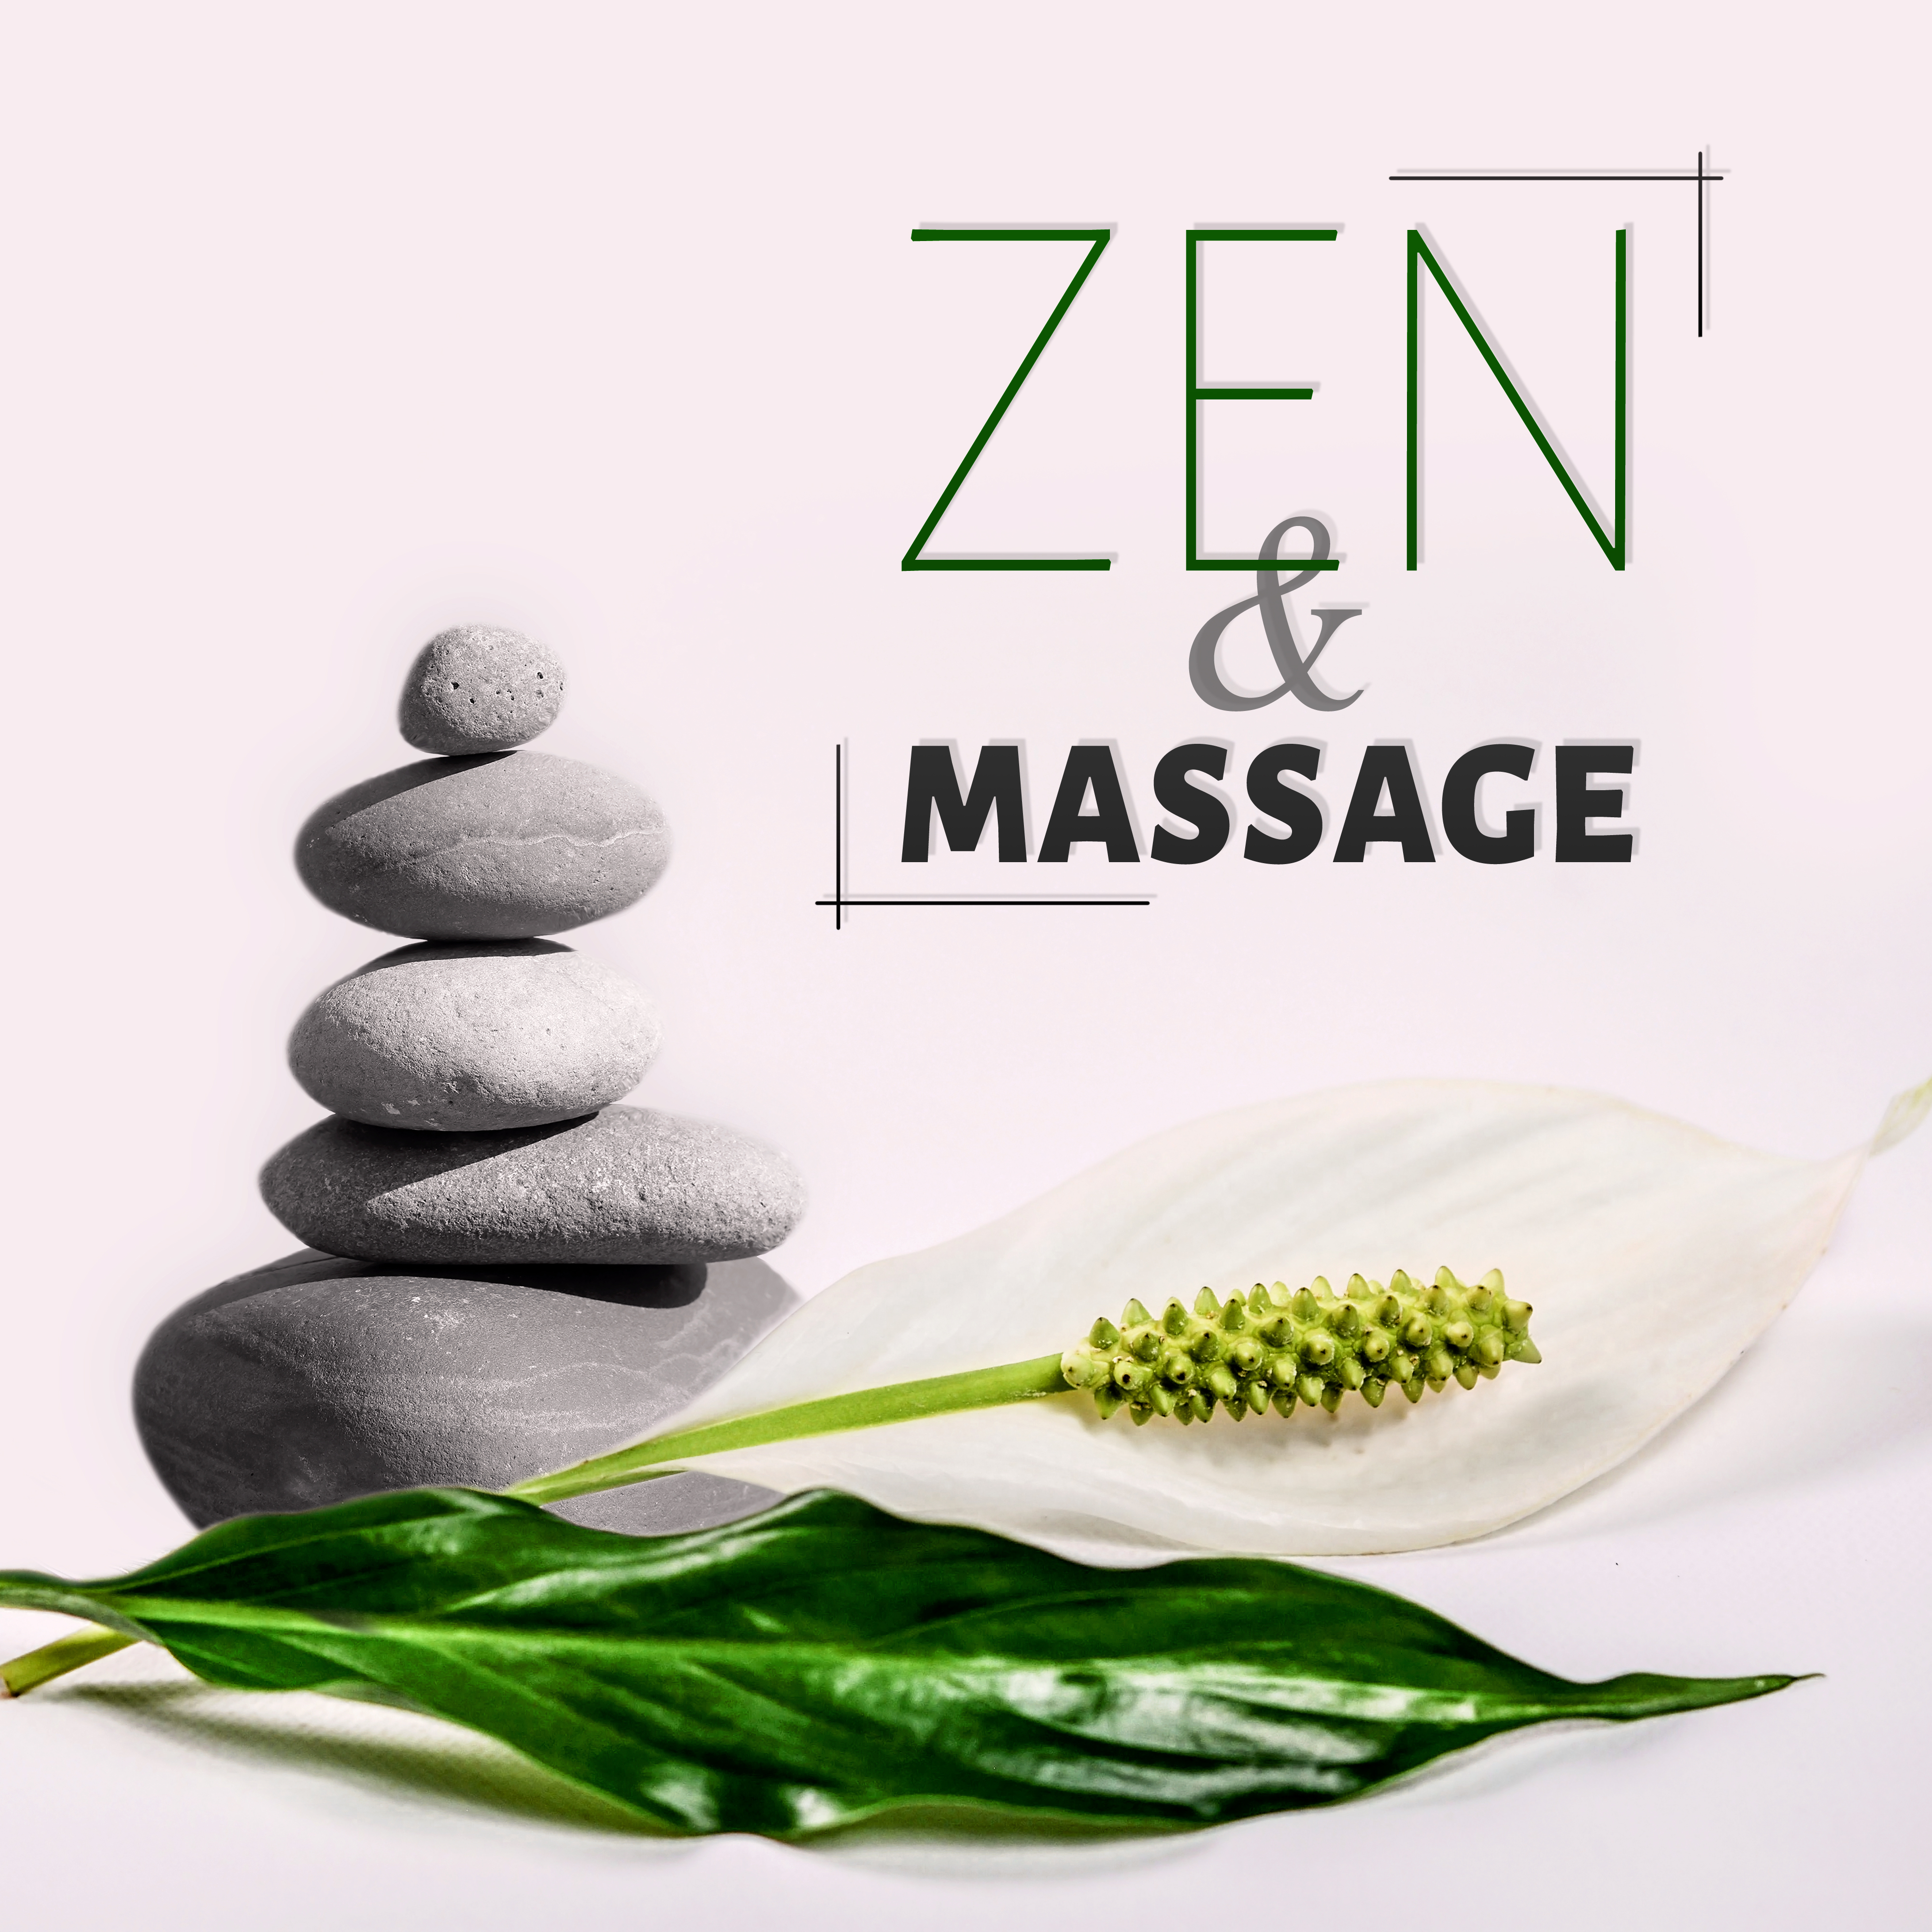 Zen & Massage - Music for Wellness, Relaxation Meditation & Yoga, Massage, Reiki, Tranquility and Total Relax